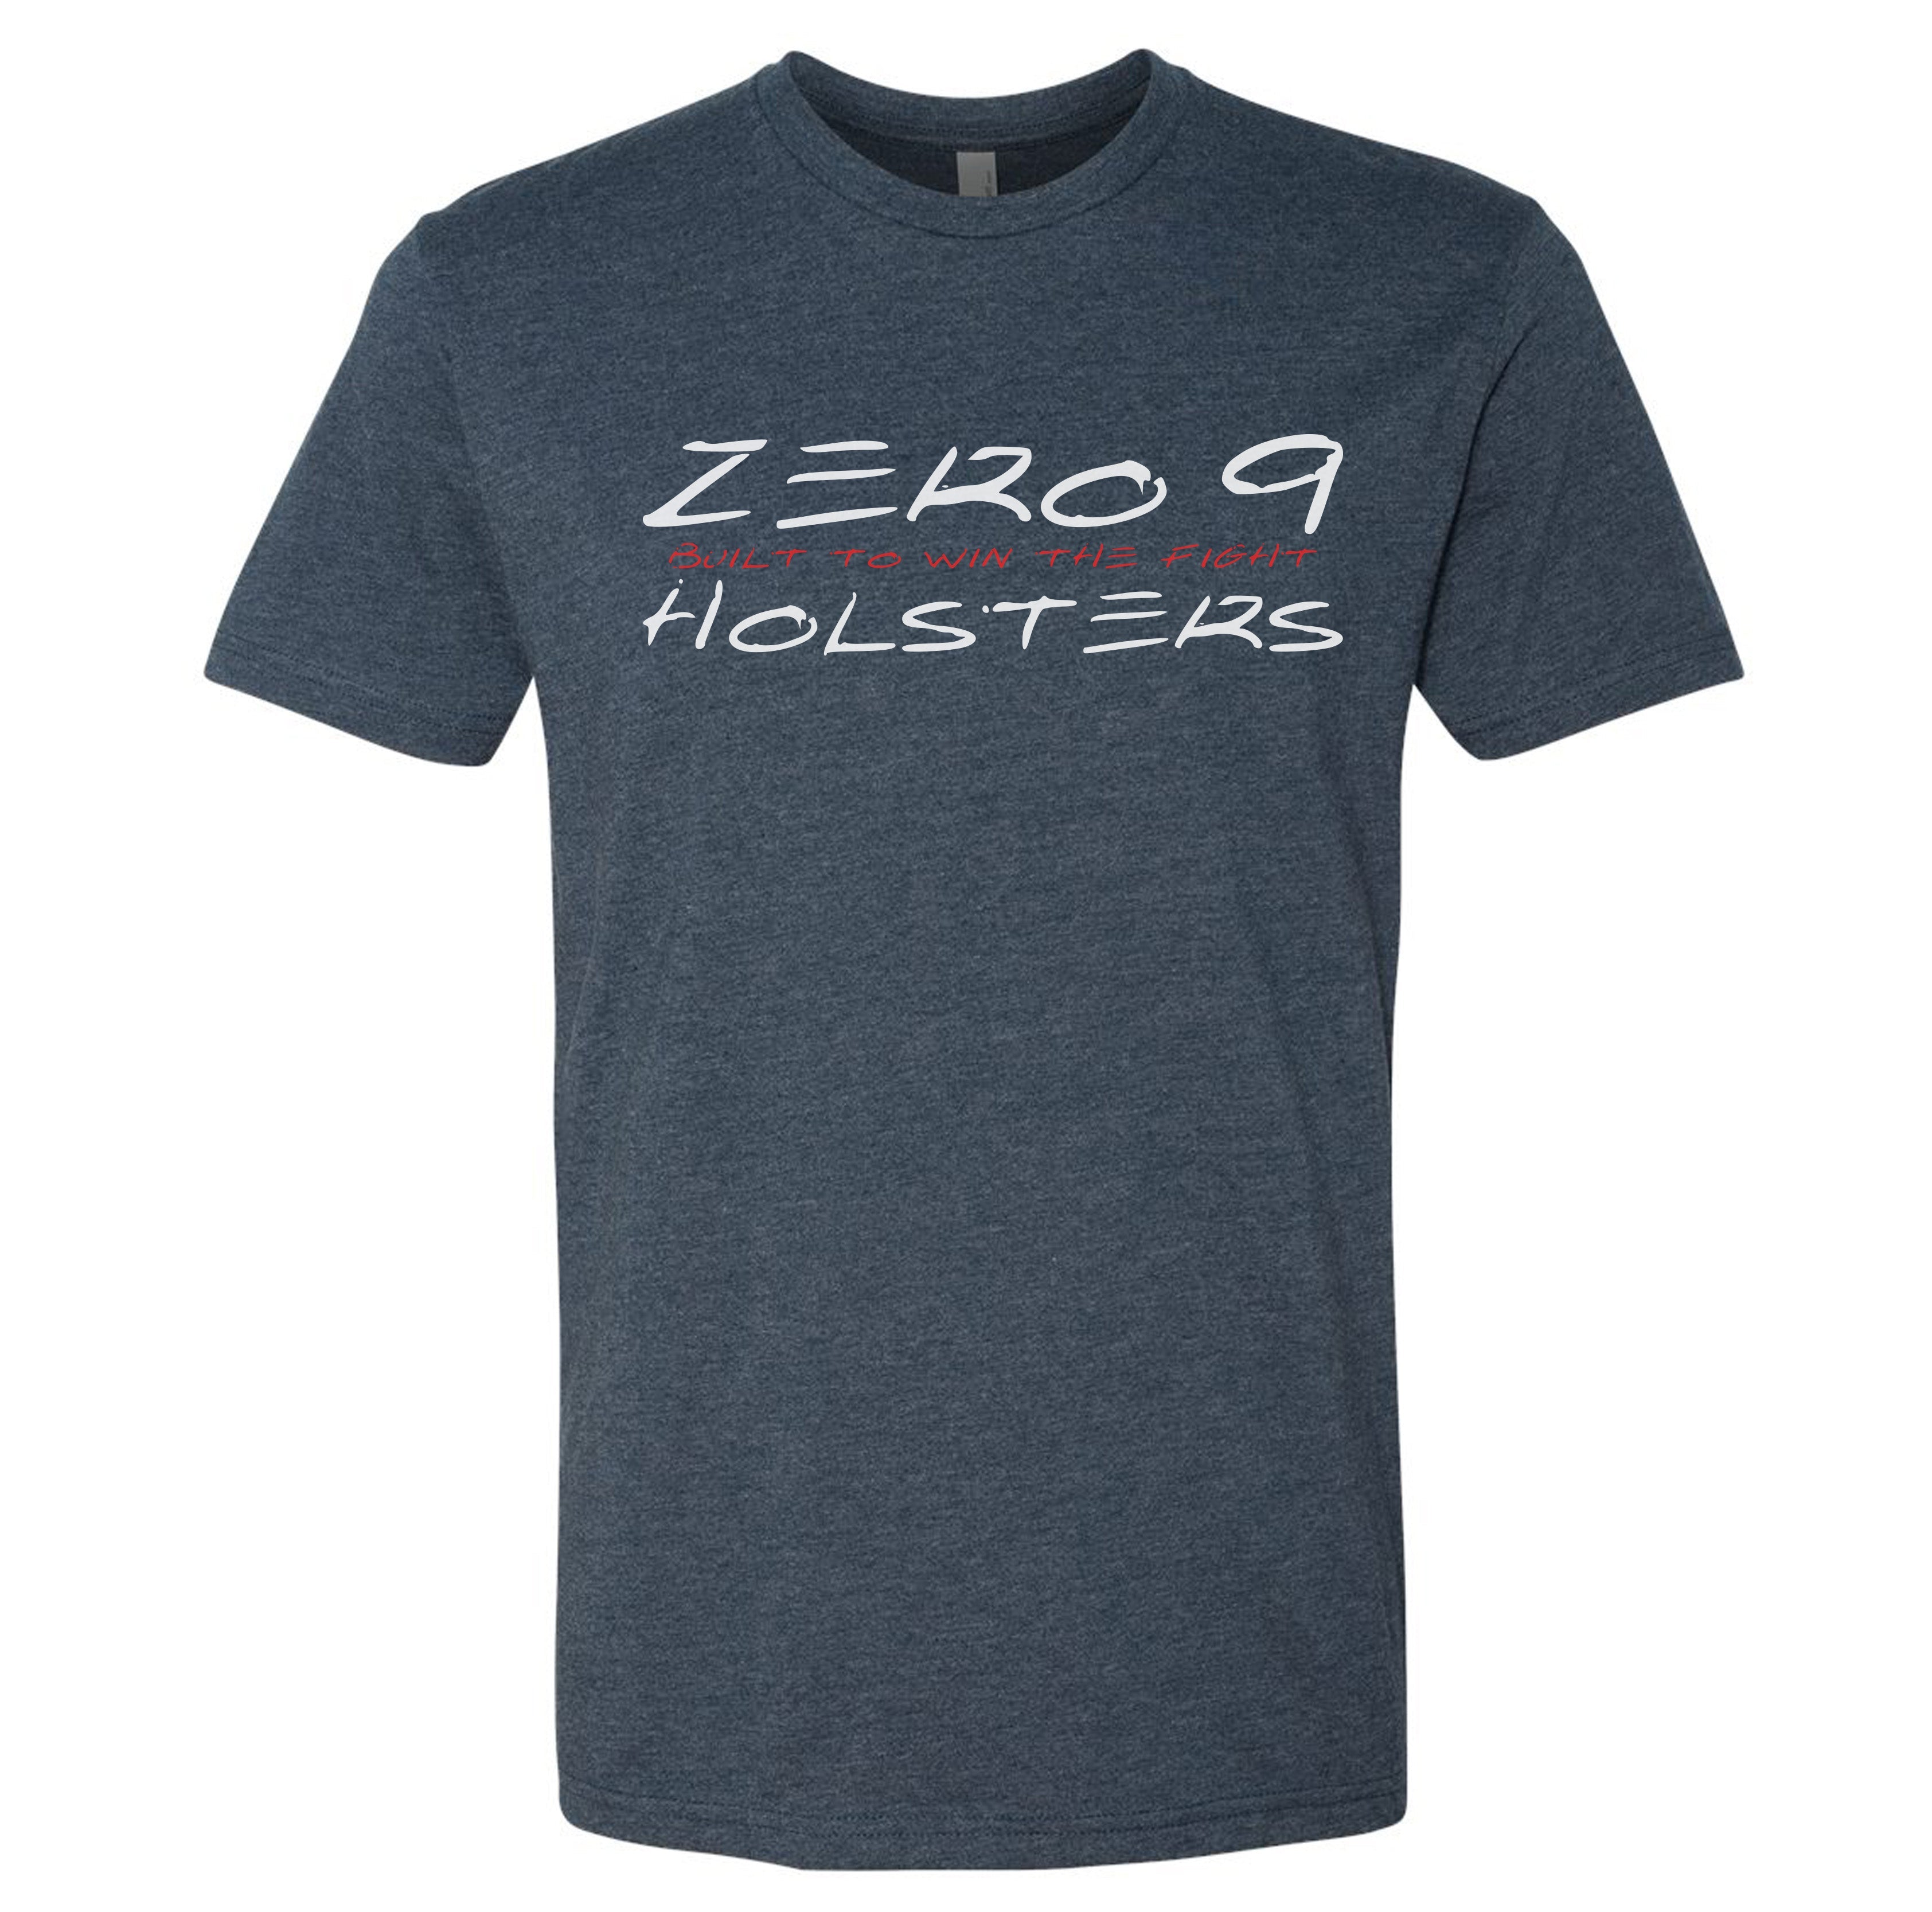 Z9 Holsters Red Line Tee